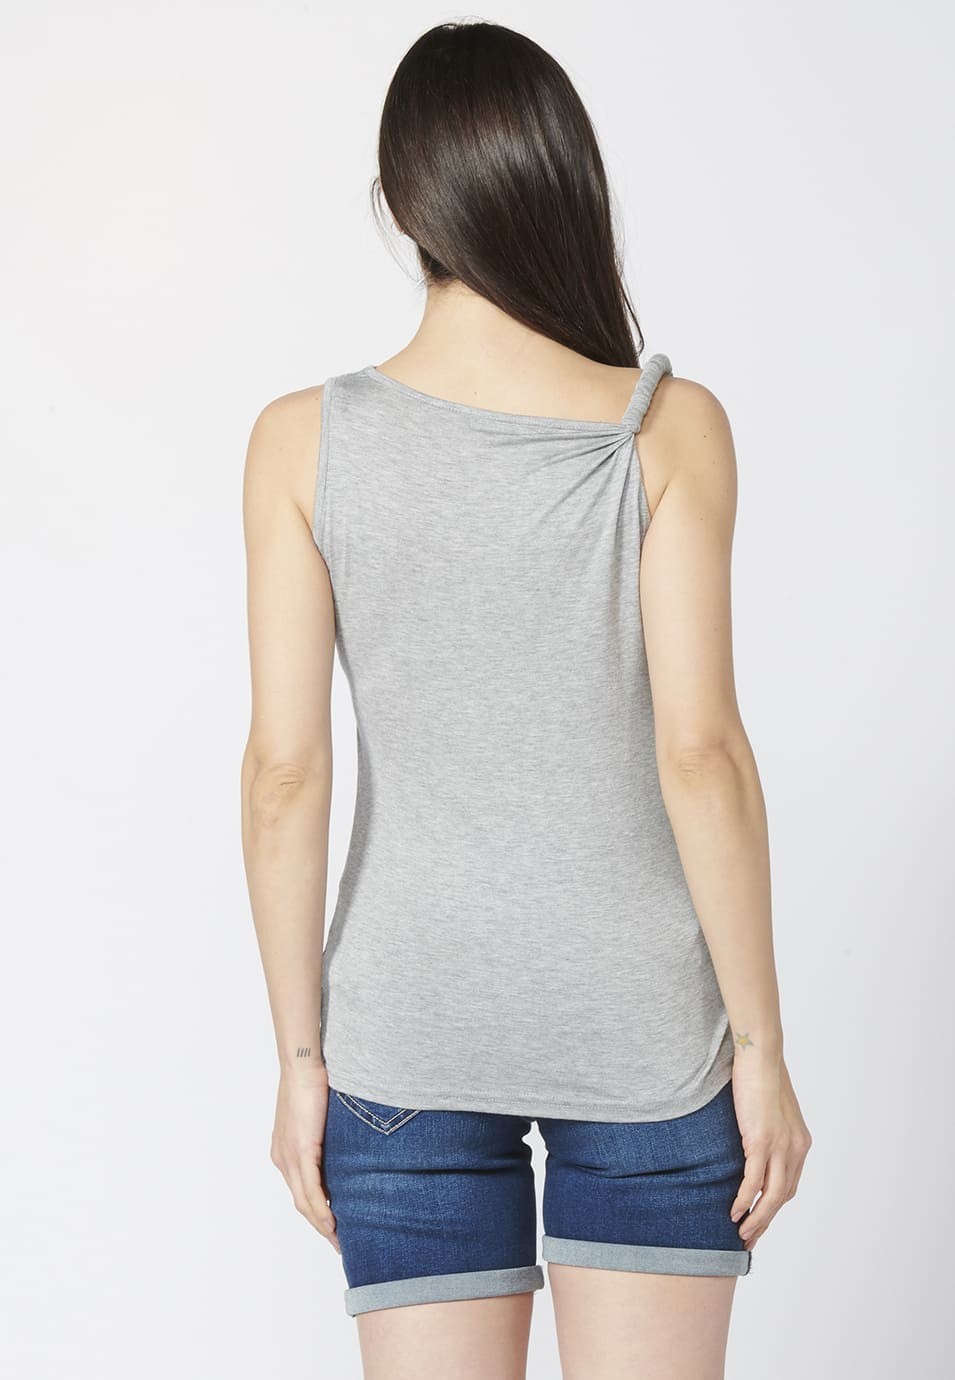 Tank Top with Loose Neckline and Ethnic Floral Print for Woman in Gray color 3